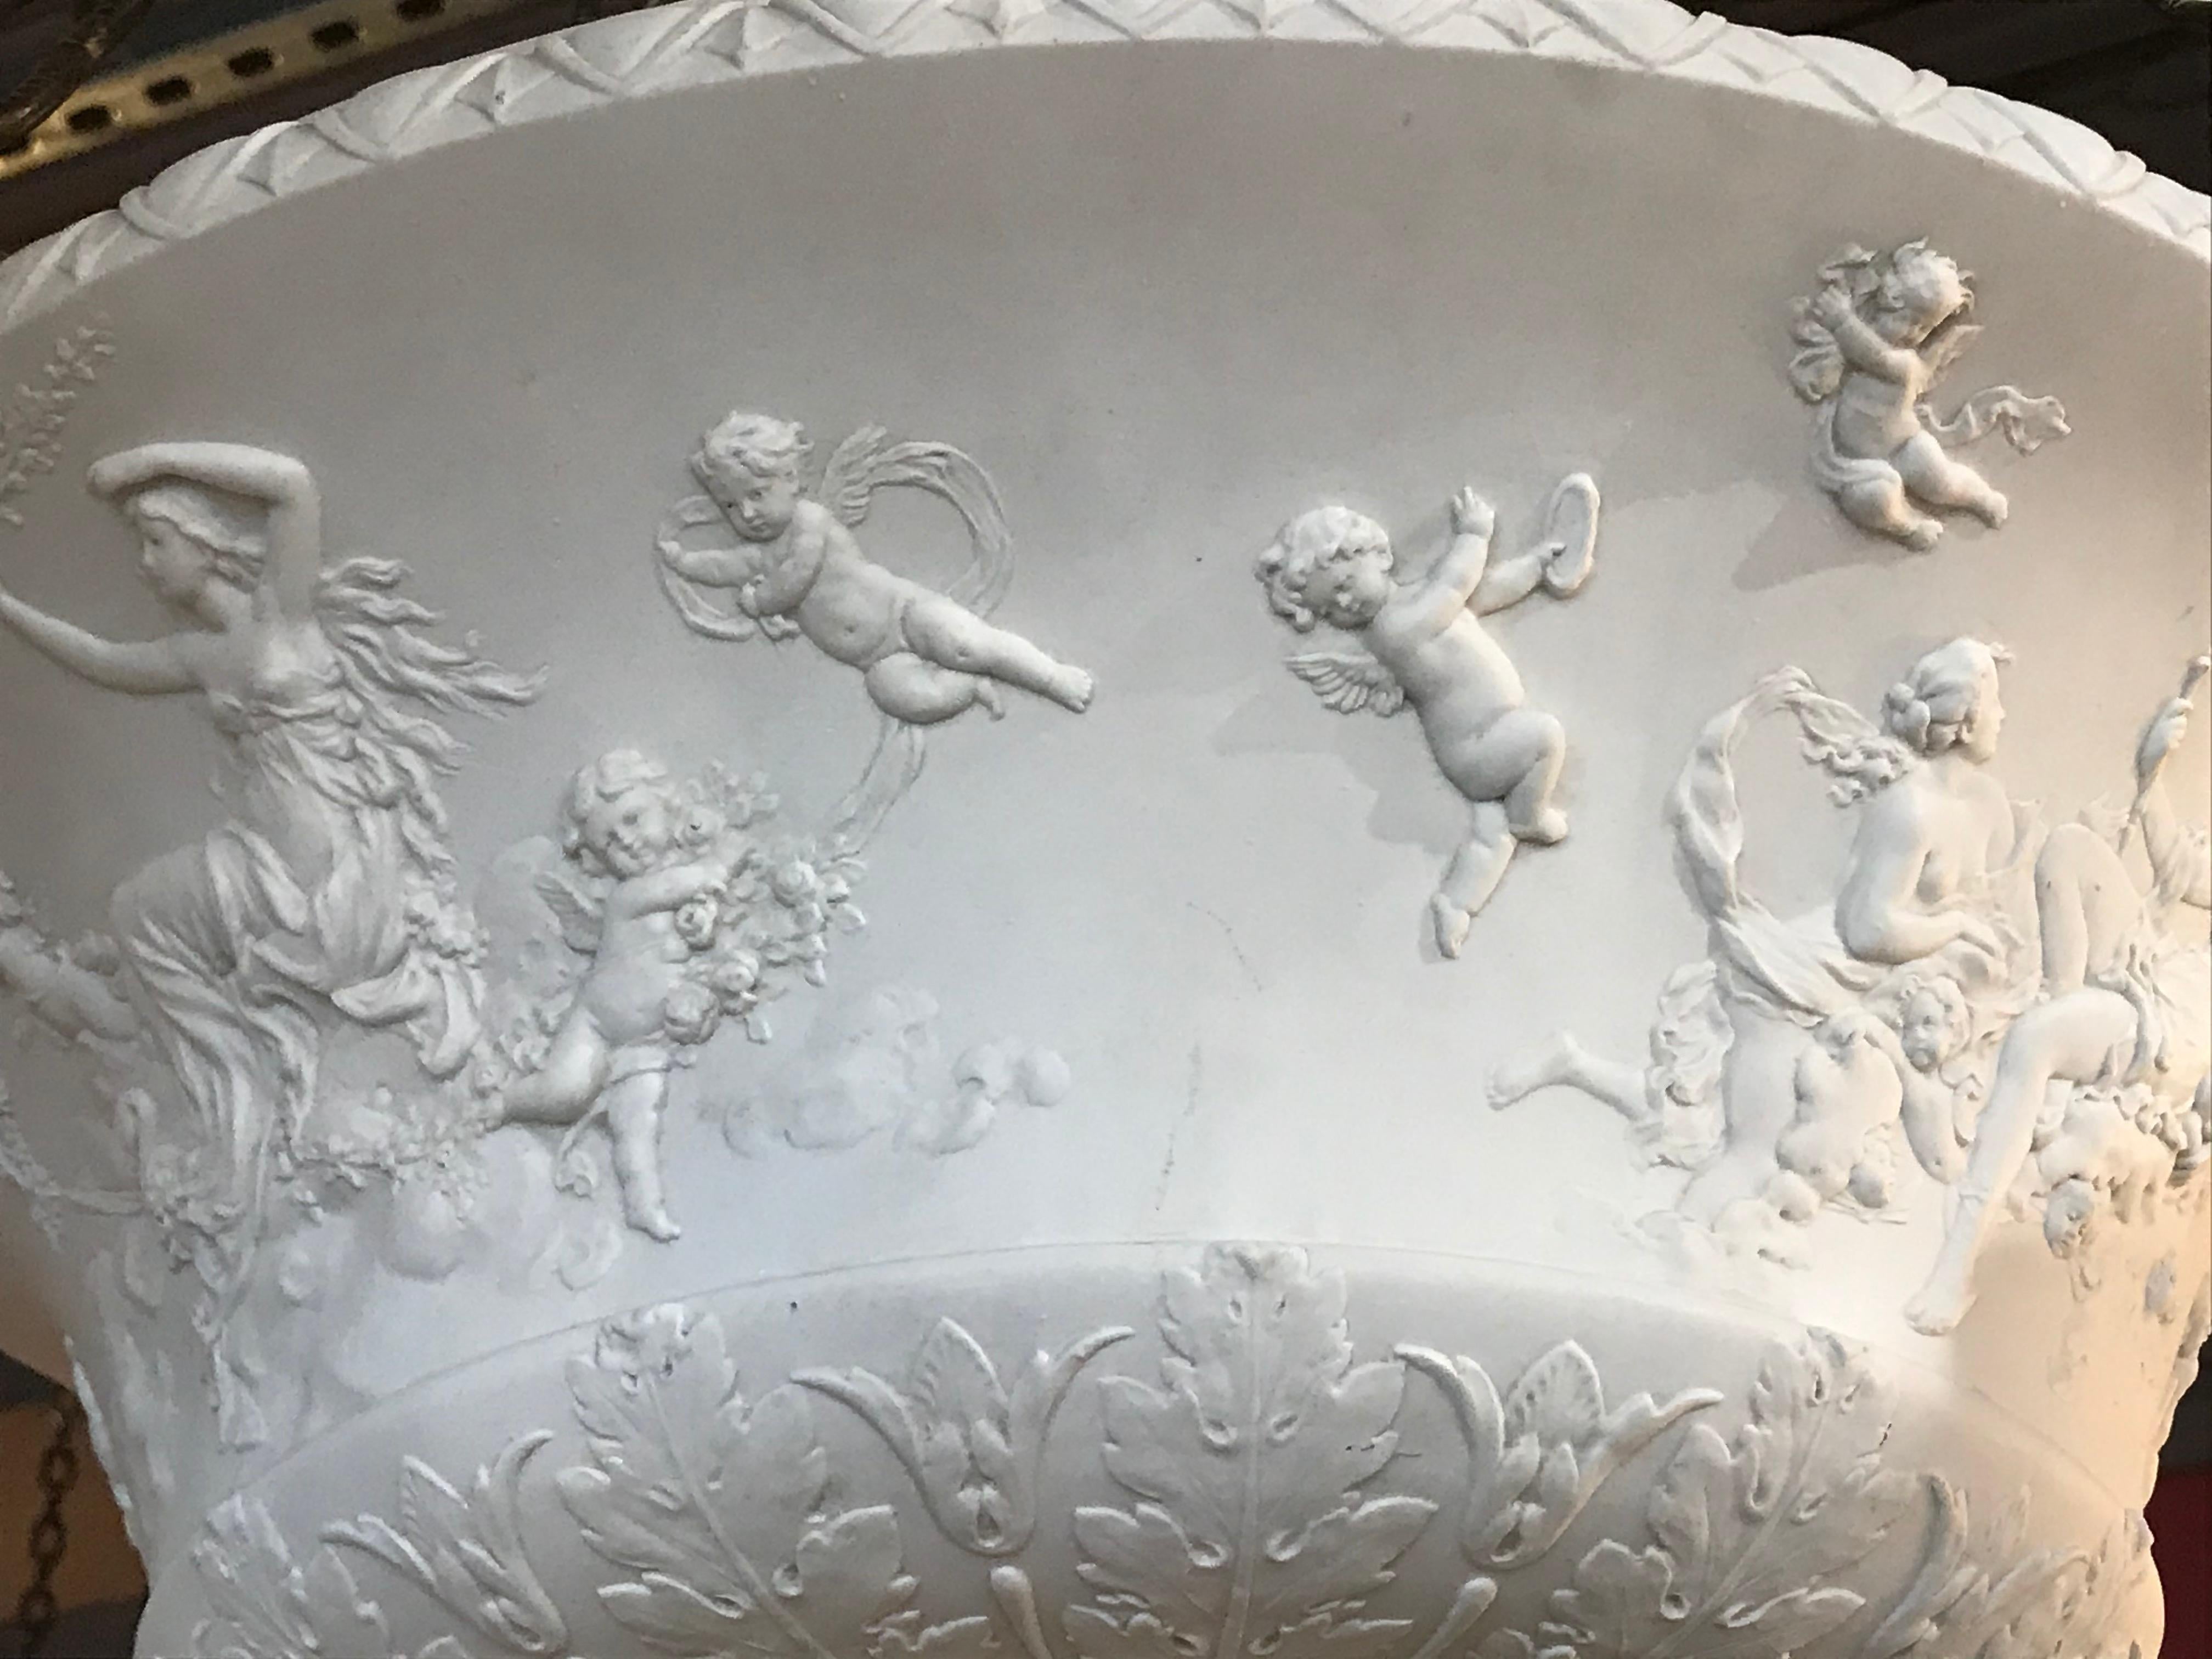 Exquisite Sevres Porcelain Plafonnier In Good Condition For Sale In Atlanta, GA